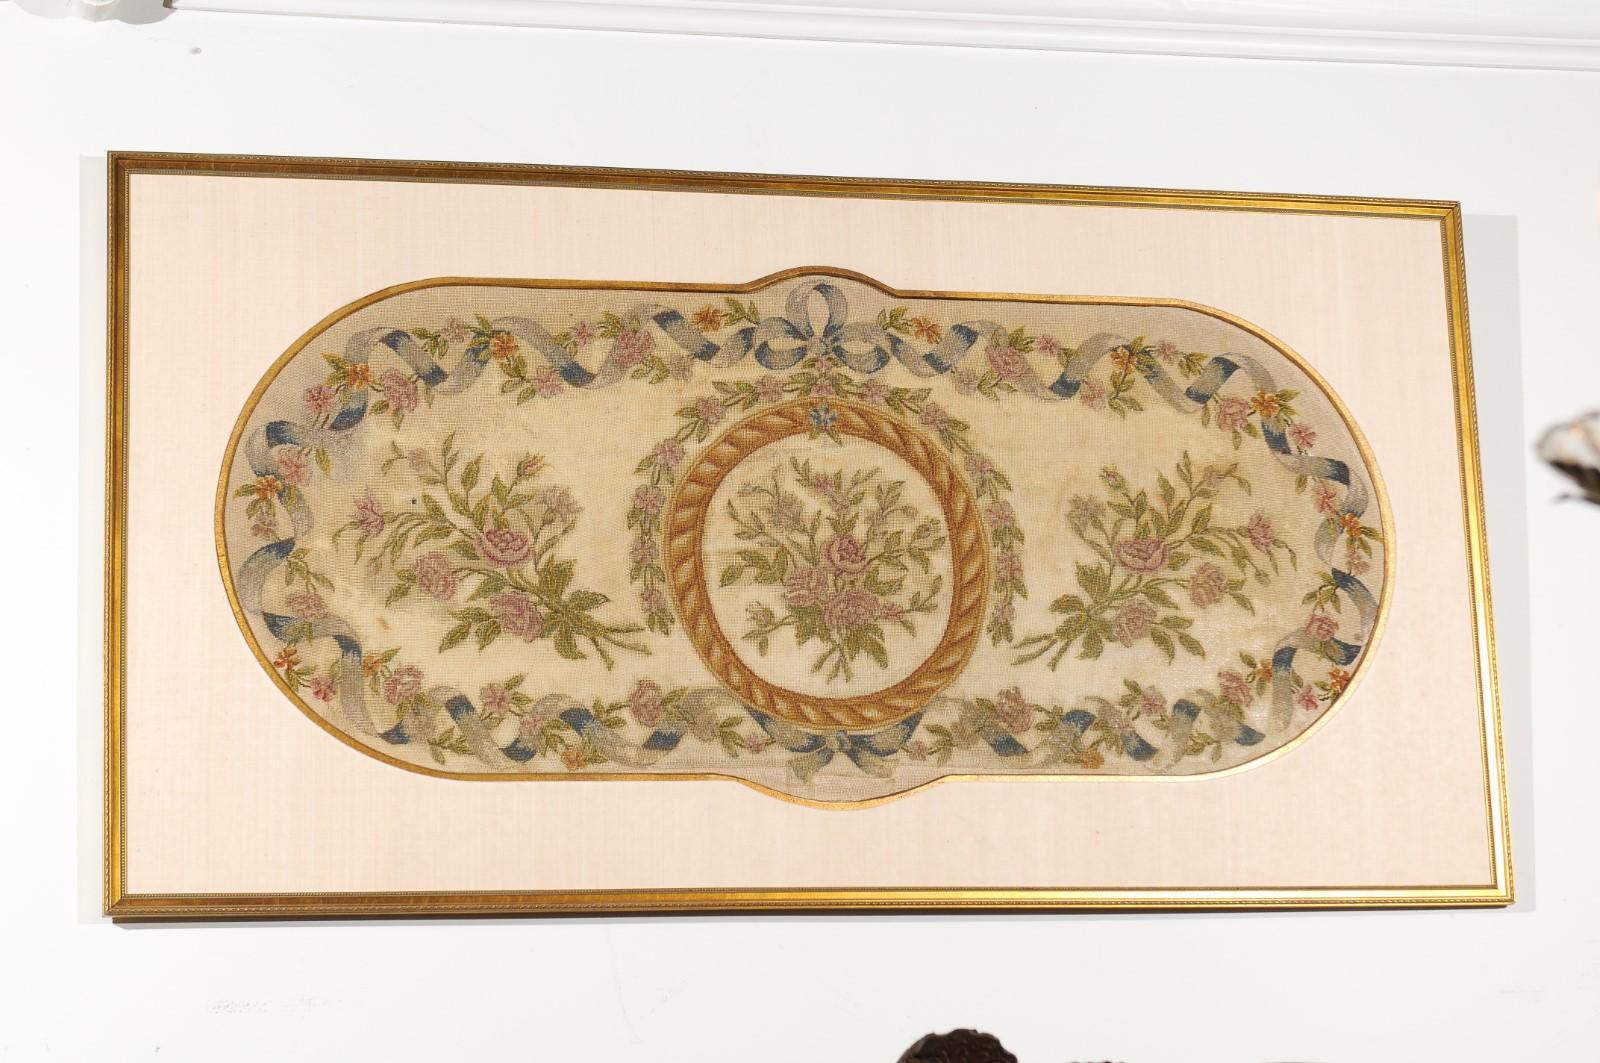 A French framed needlepoint tapestry from the 19th century, with ribbon and floral motifs. Set inside a simple yet elegant gilded frame with matting and gilt rim, this lovely horizontal needlepoint tapestry features an oblong shape accented with a